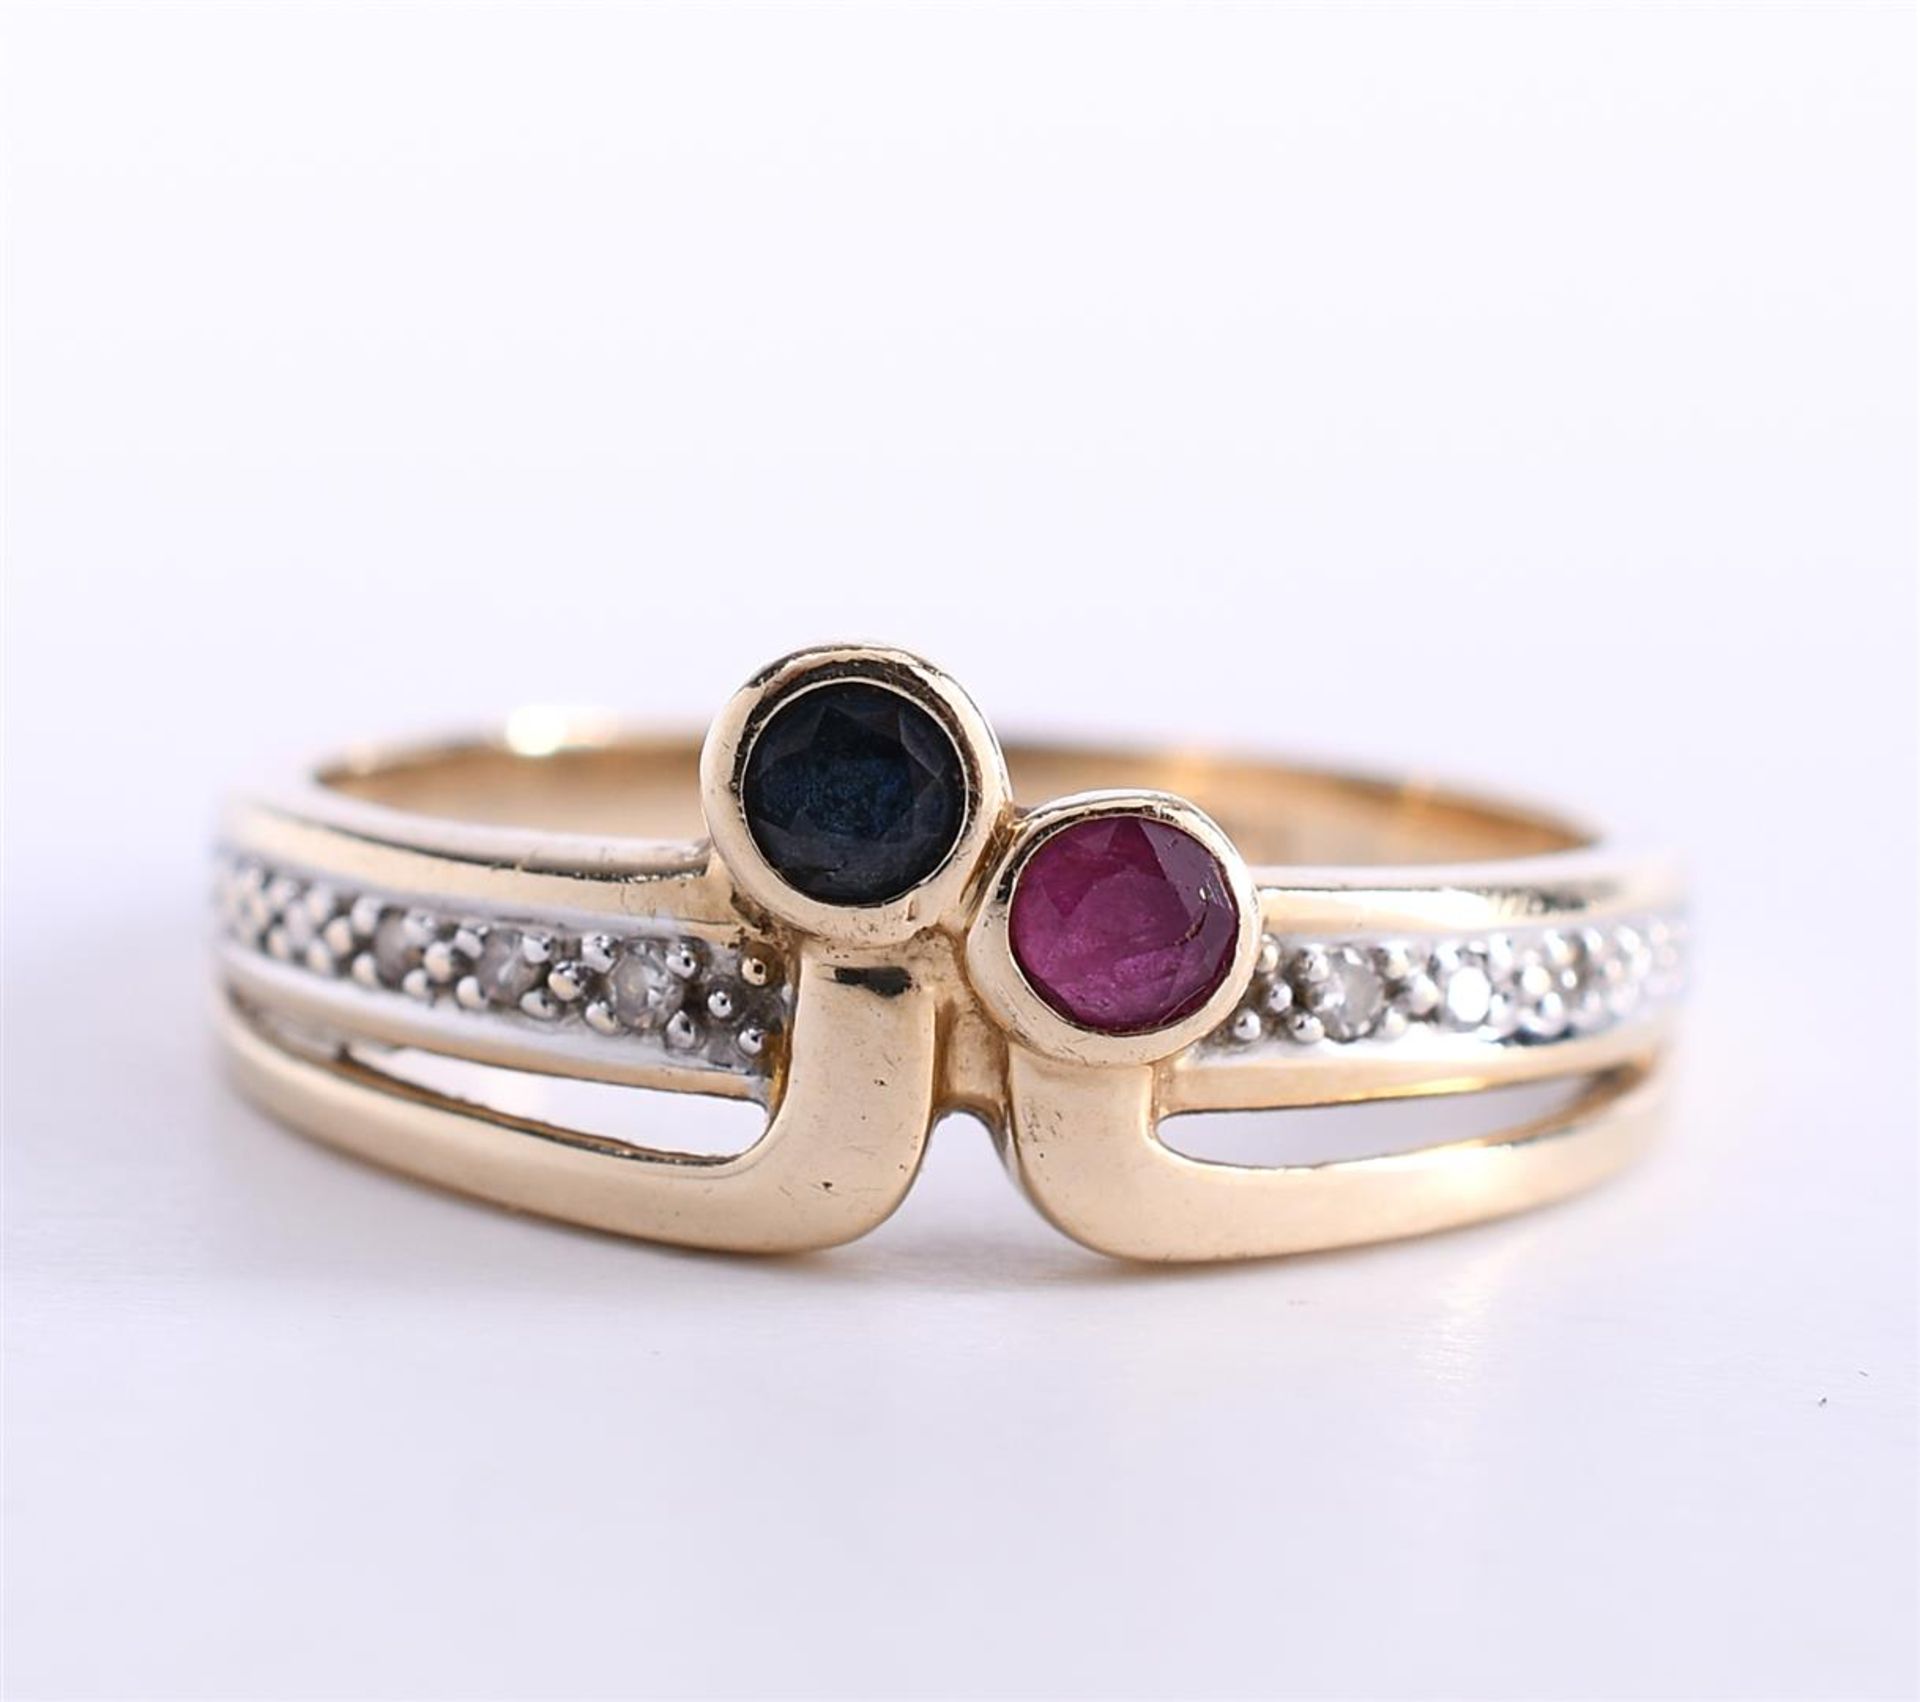 14 kt yellow gold fantasy ring set with a brilliant cut ruby and blue sapphire